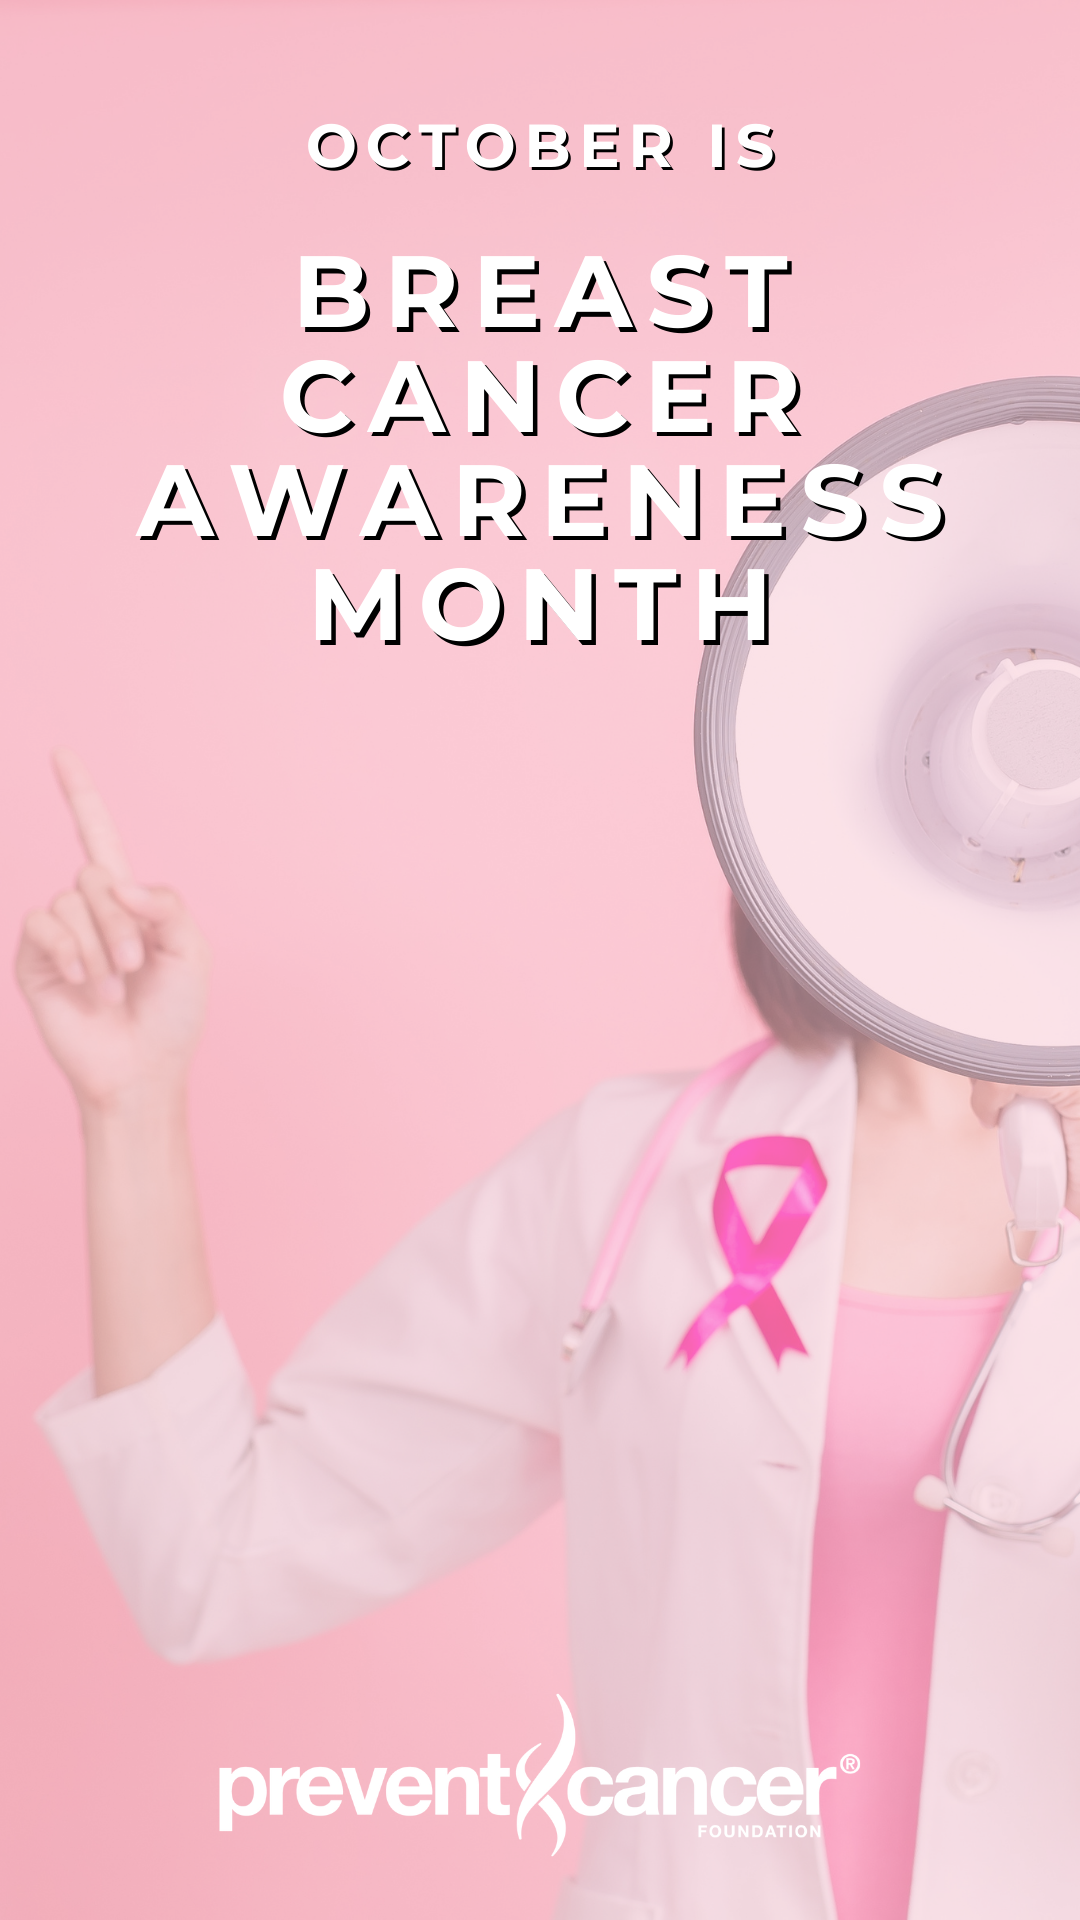 Breast Cancer Awareness Month social asset #1 (story)